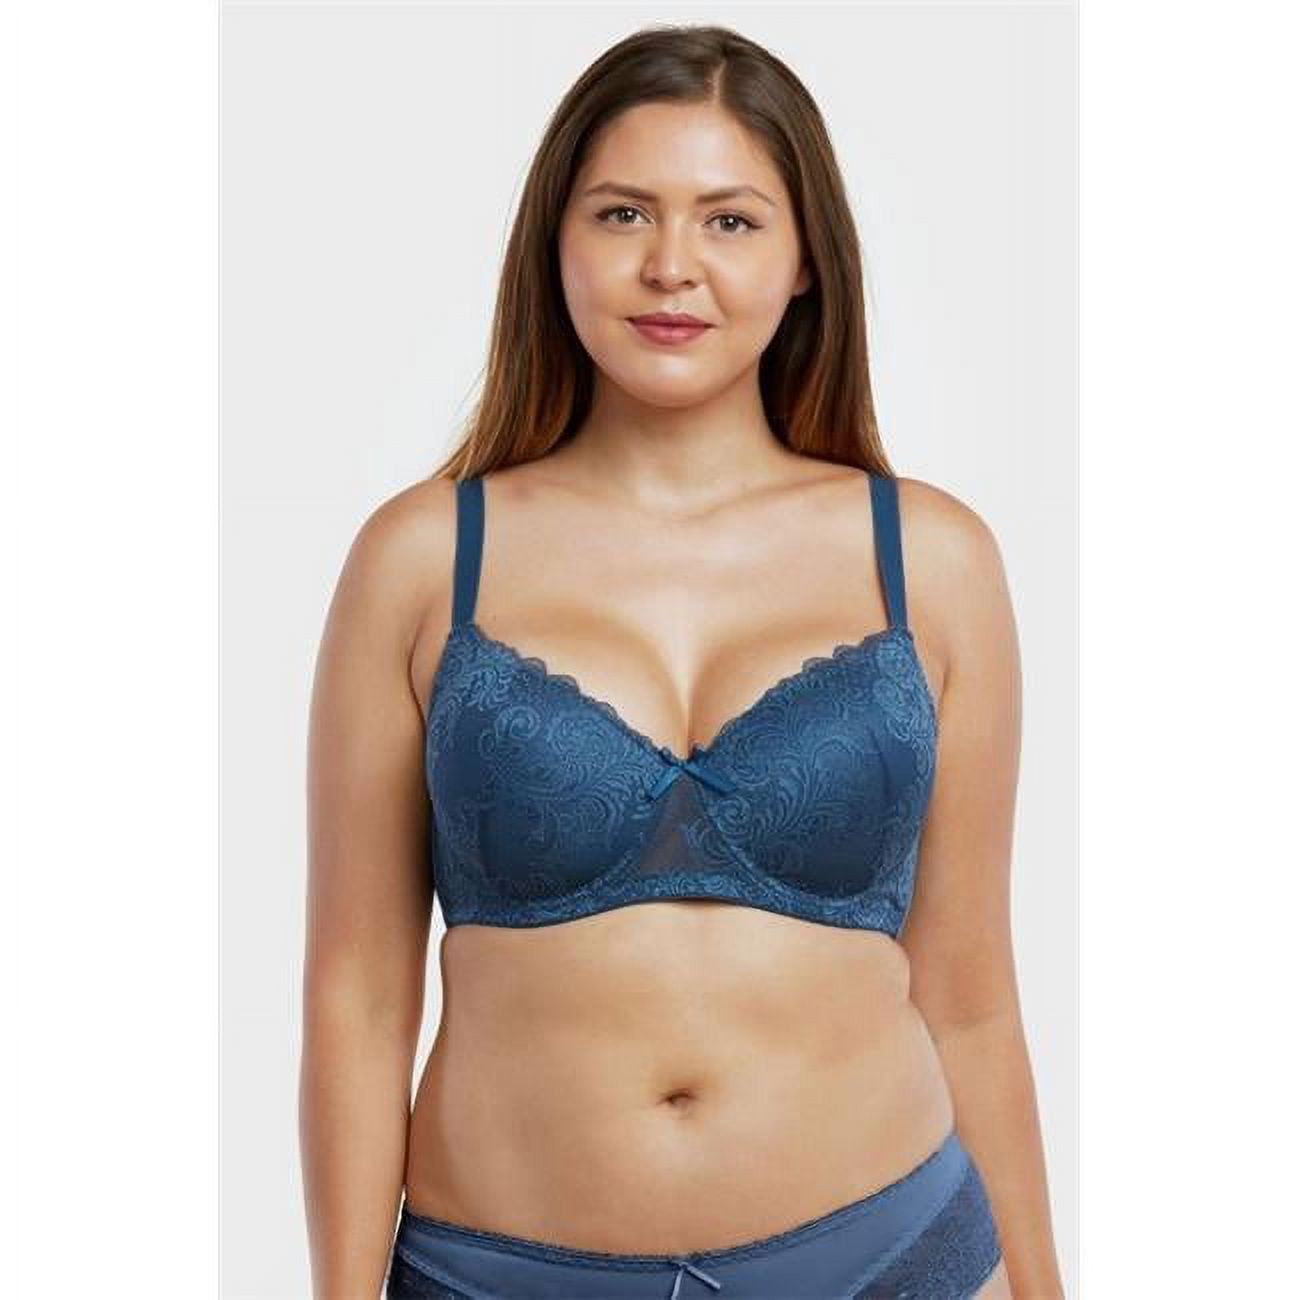 36D Breast Size - Her Bra Size